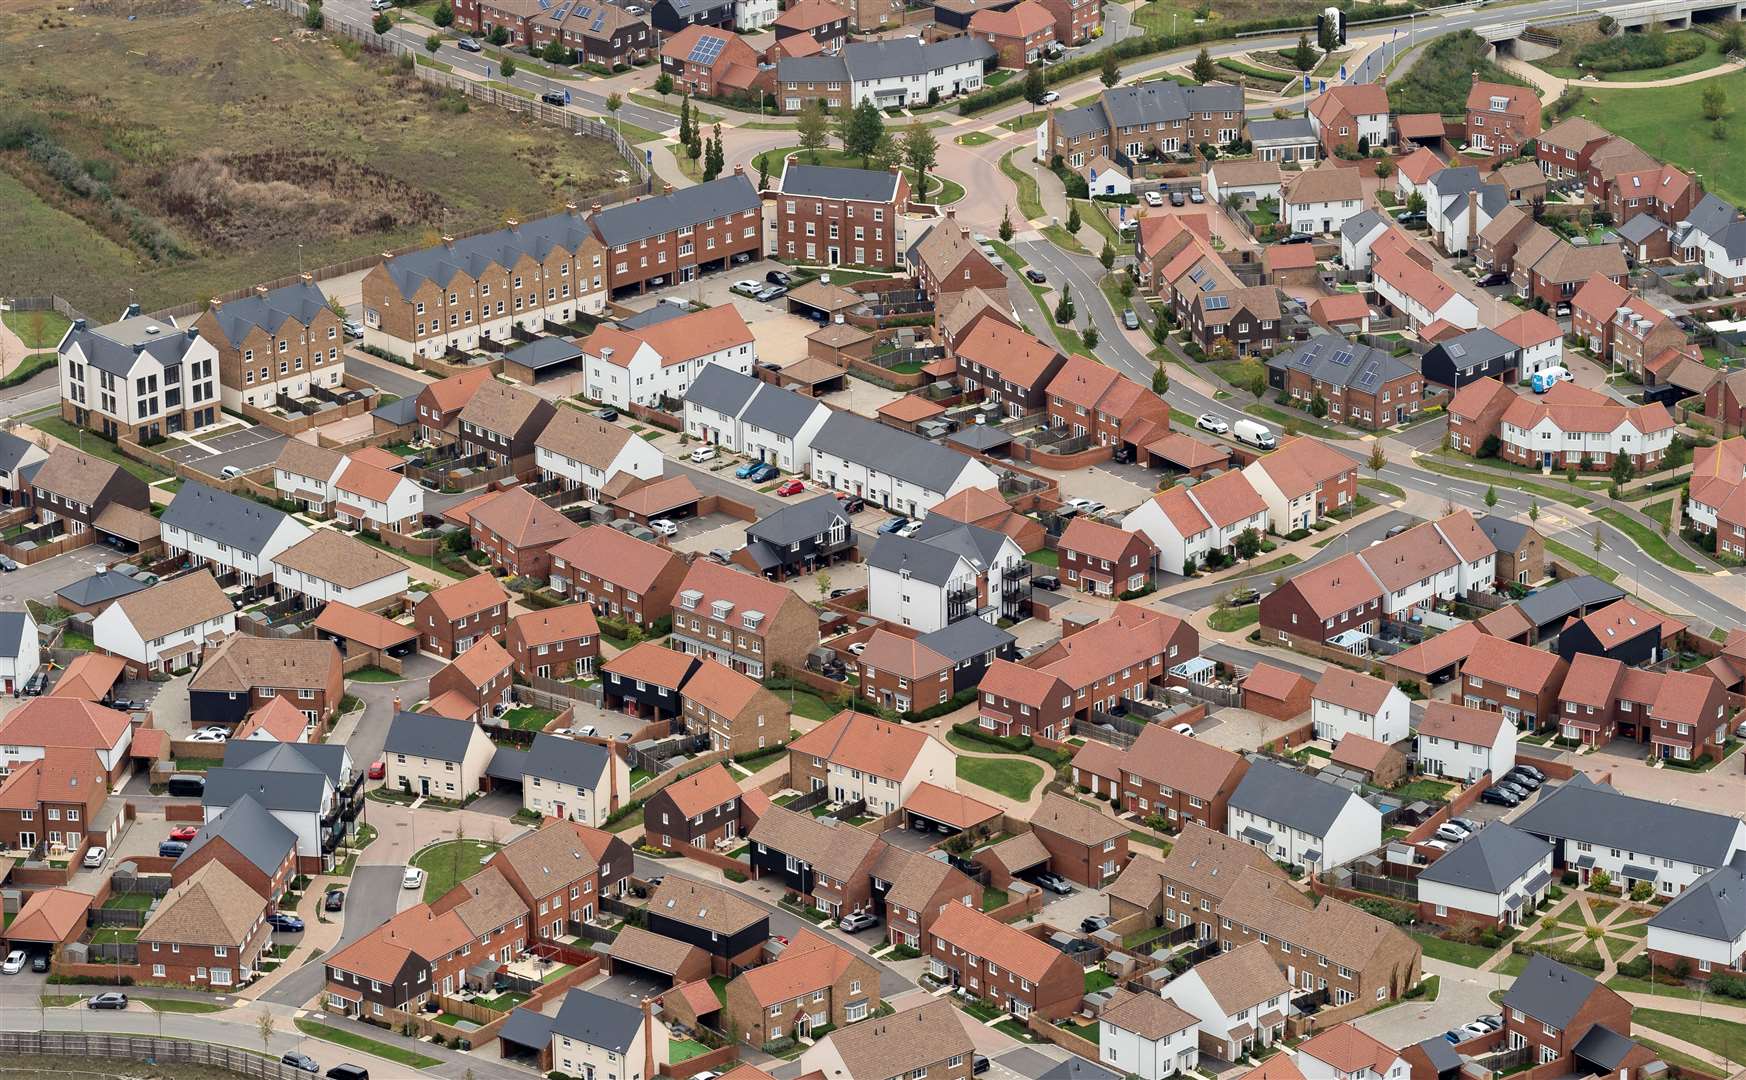 Ashford has seen plenty of new homes built – but it remains the district with the highest undeveloped percentage in the county